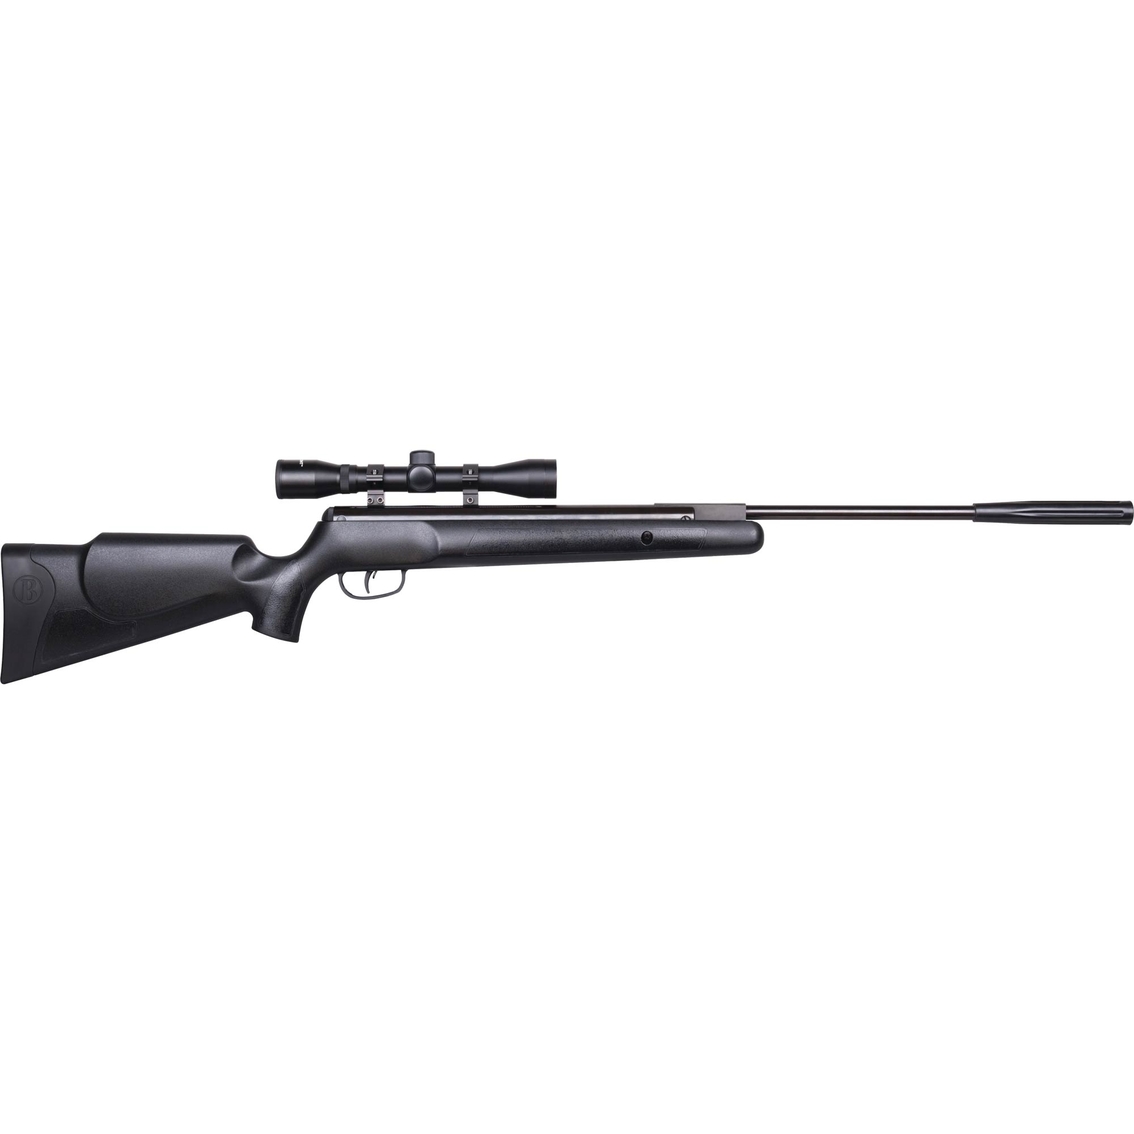 Benjamin Prowler Air Rifle with 4x32mm Scope - Image 2 of 2